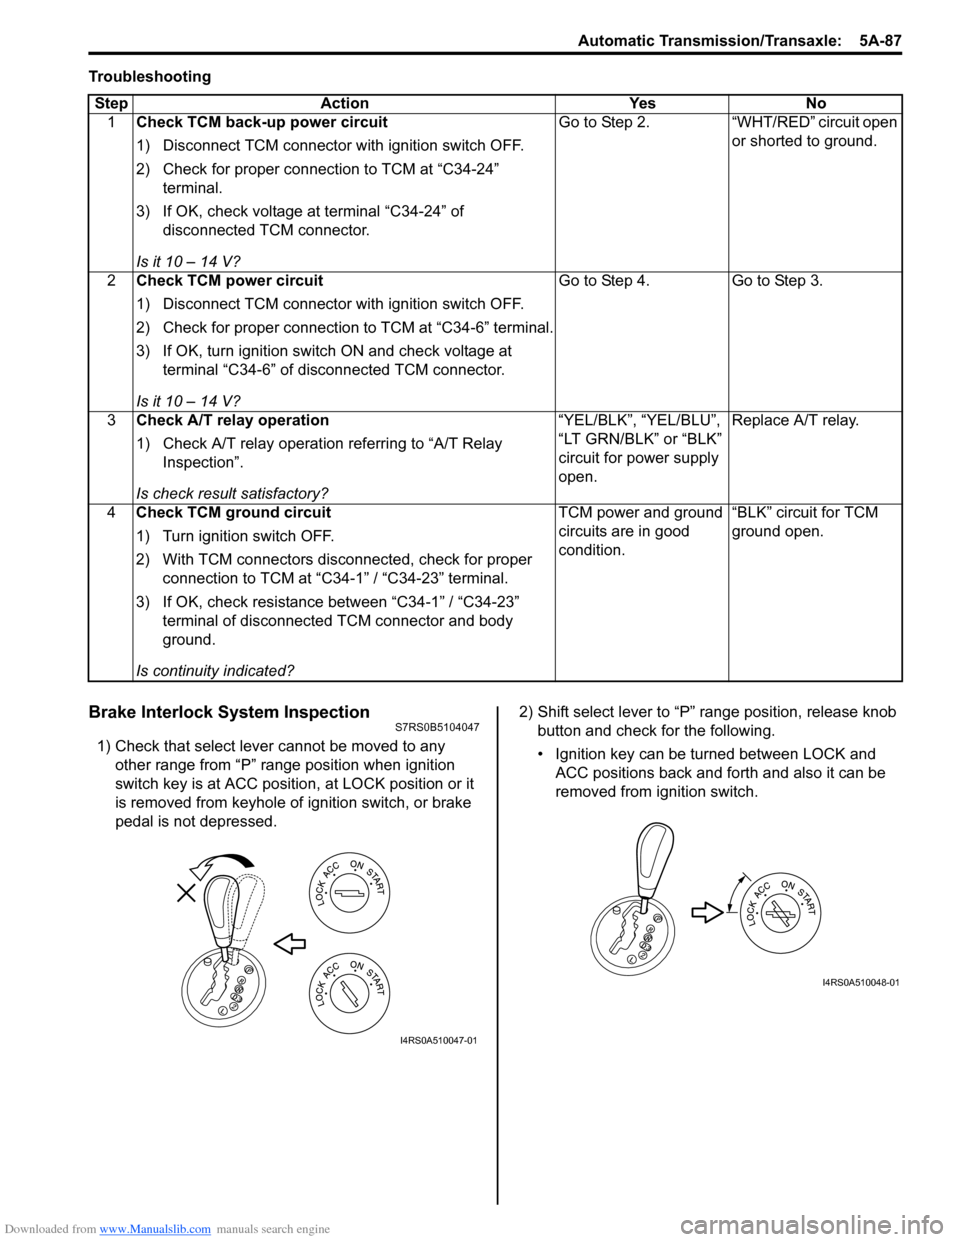 SUZUKI SWIFT 2006 2.G Service Workshop Manual Downloaded from www.Manualslib.com manuals search engine Automatic Transmission/Transaxle:  5A-87
Troubleshooting
Brake Interlock System InspectionS7RS0B5104047
1) Check that select lever cannot be mo